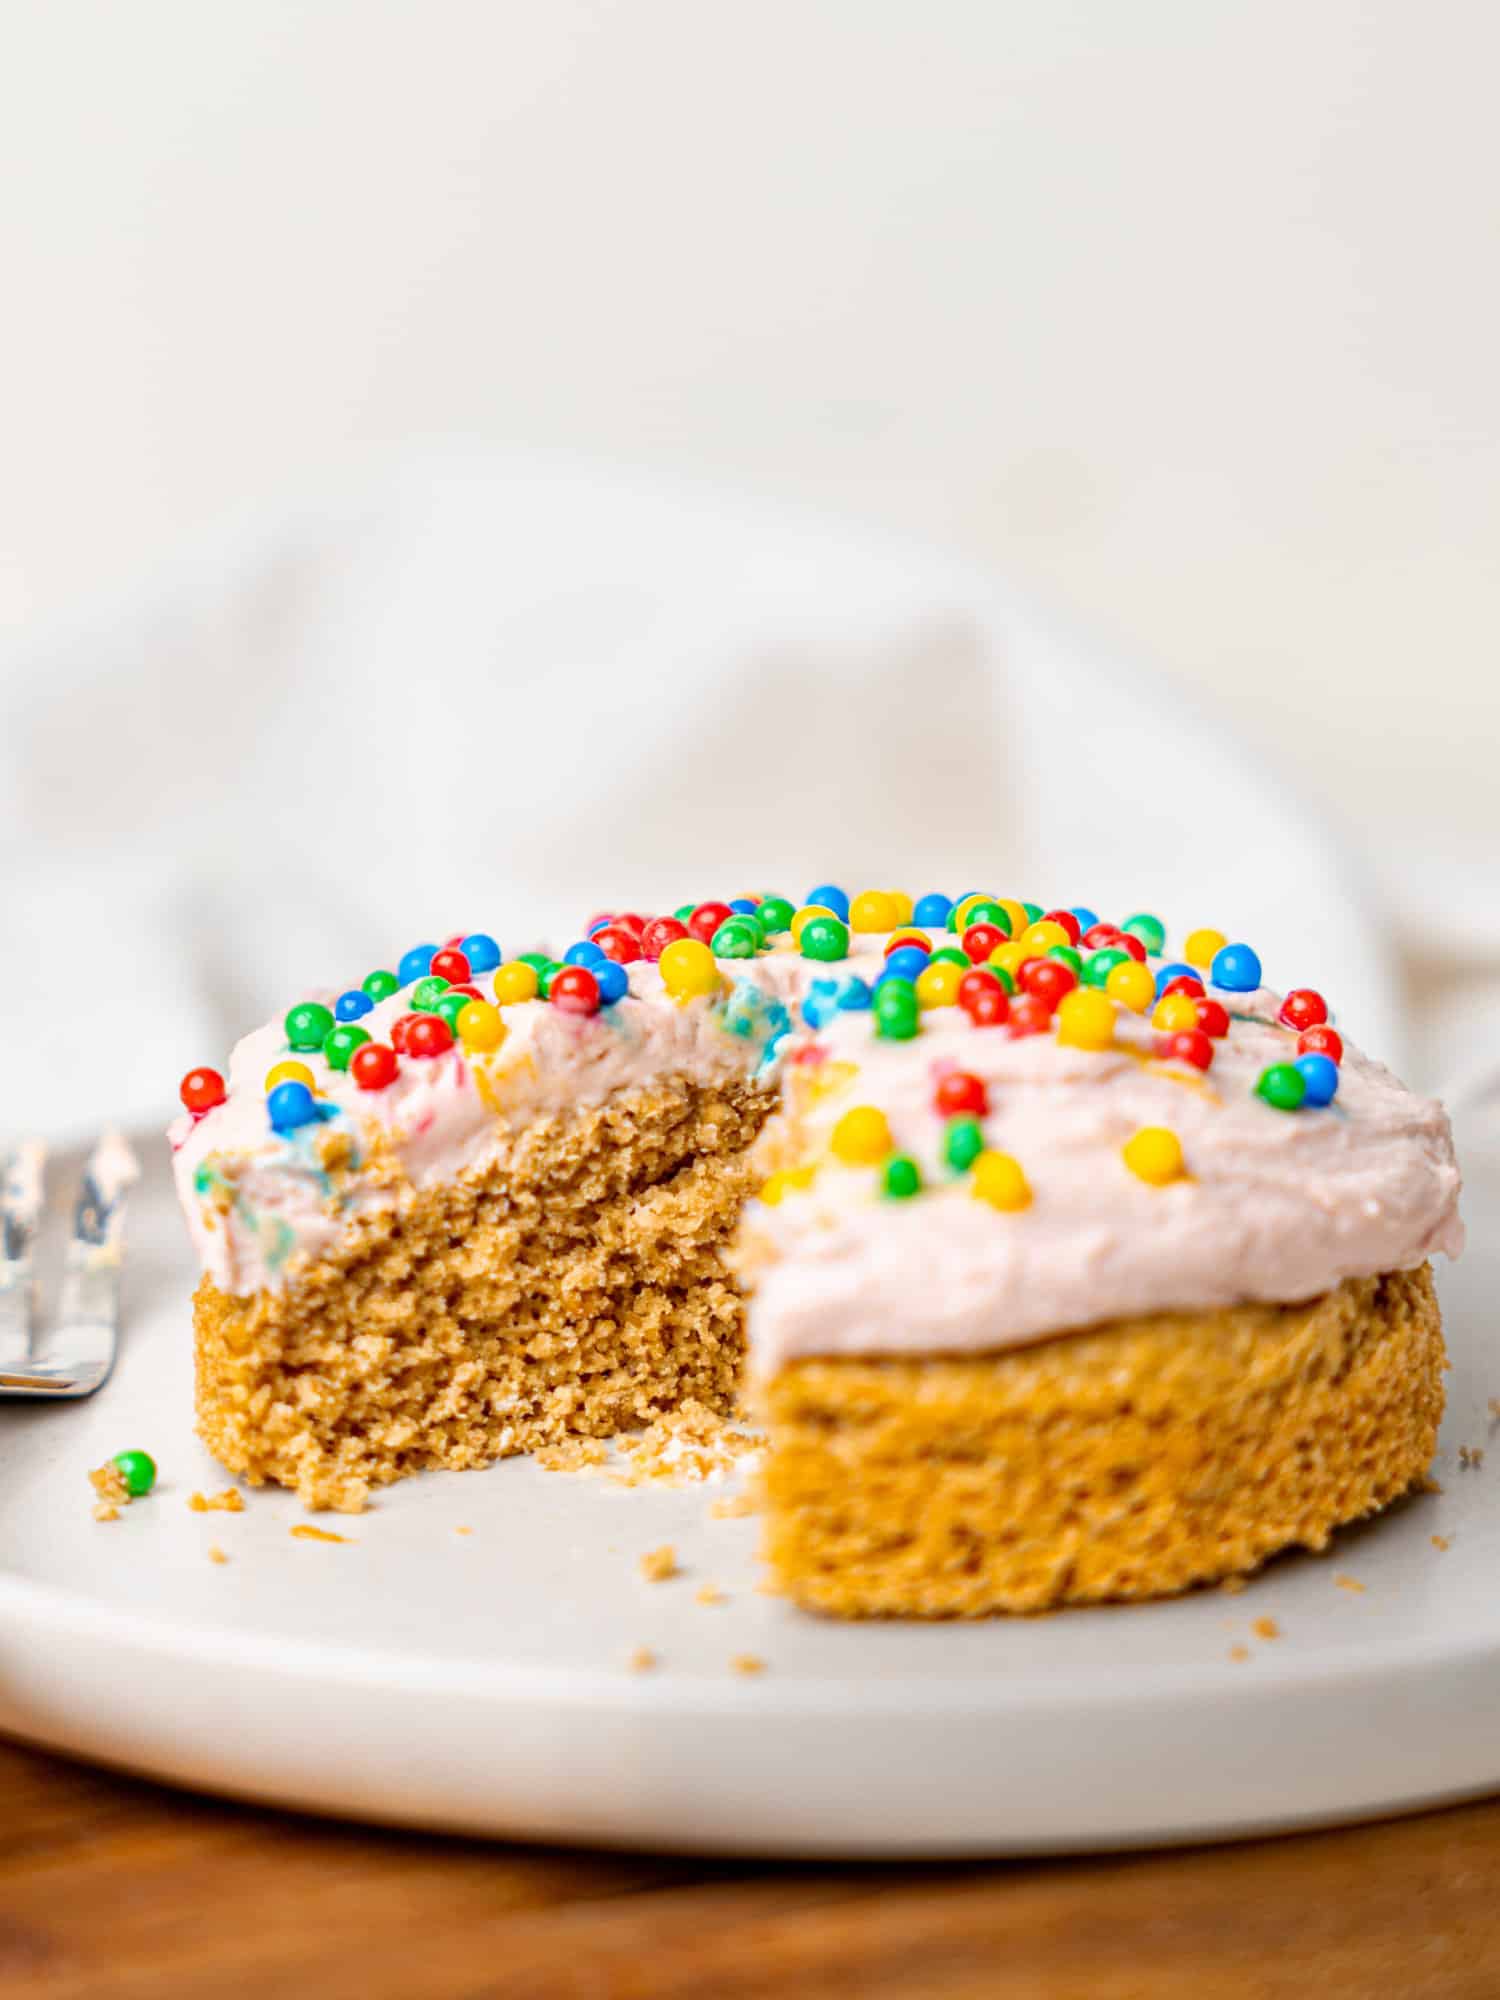 A single-serve birthday with pink protein frosting and sprinkles on a plate. A section is missing from the cake and there is a cake fork on the plate.